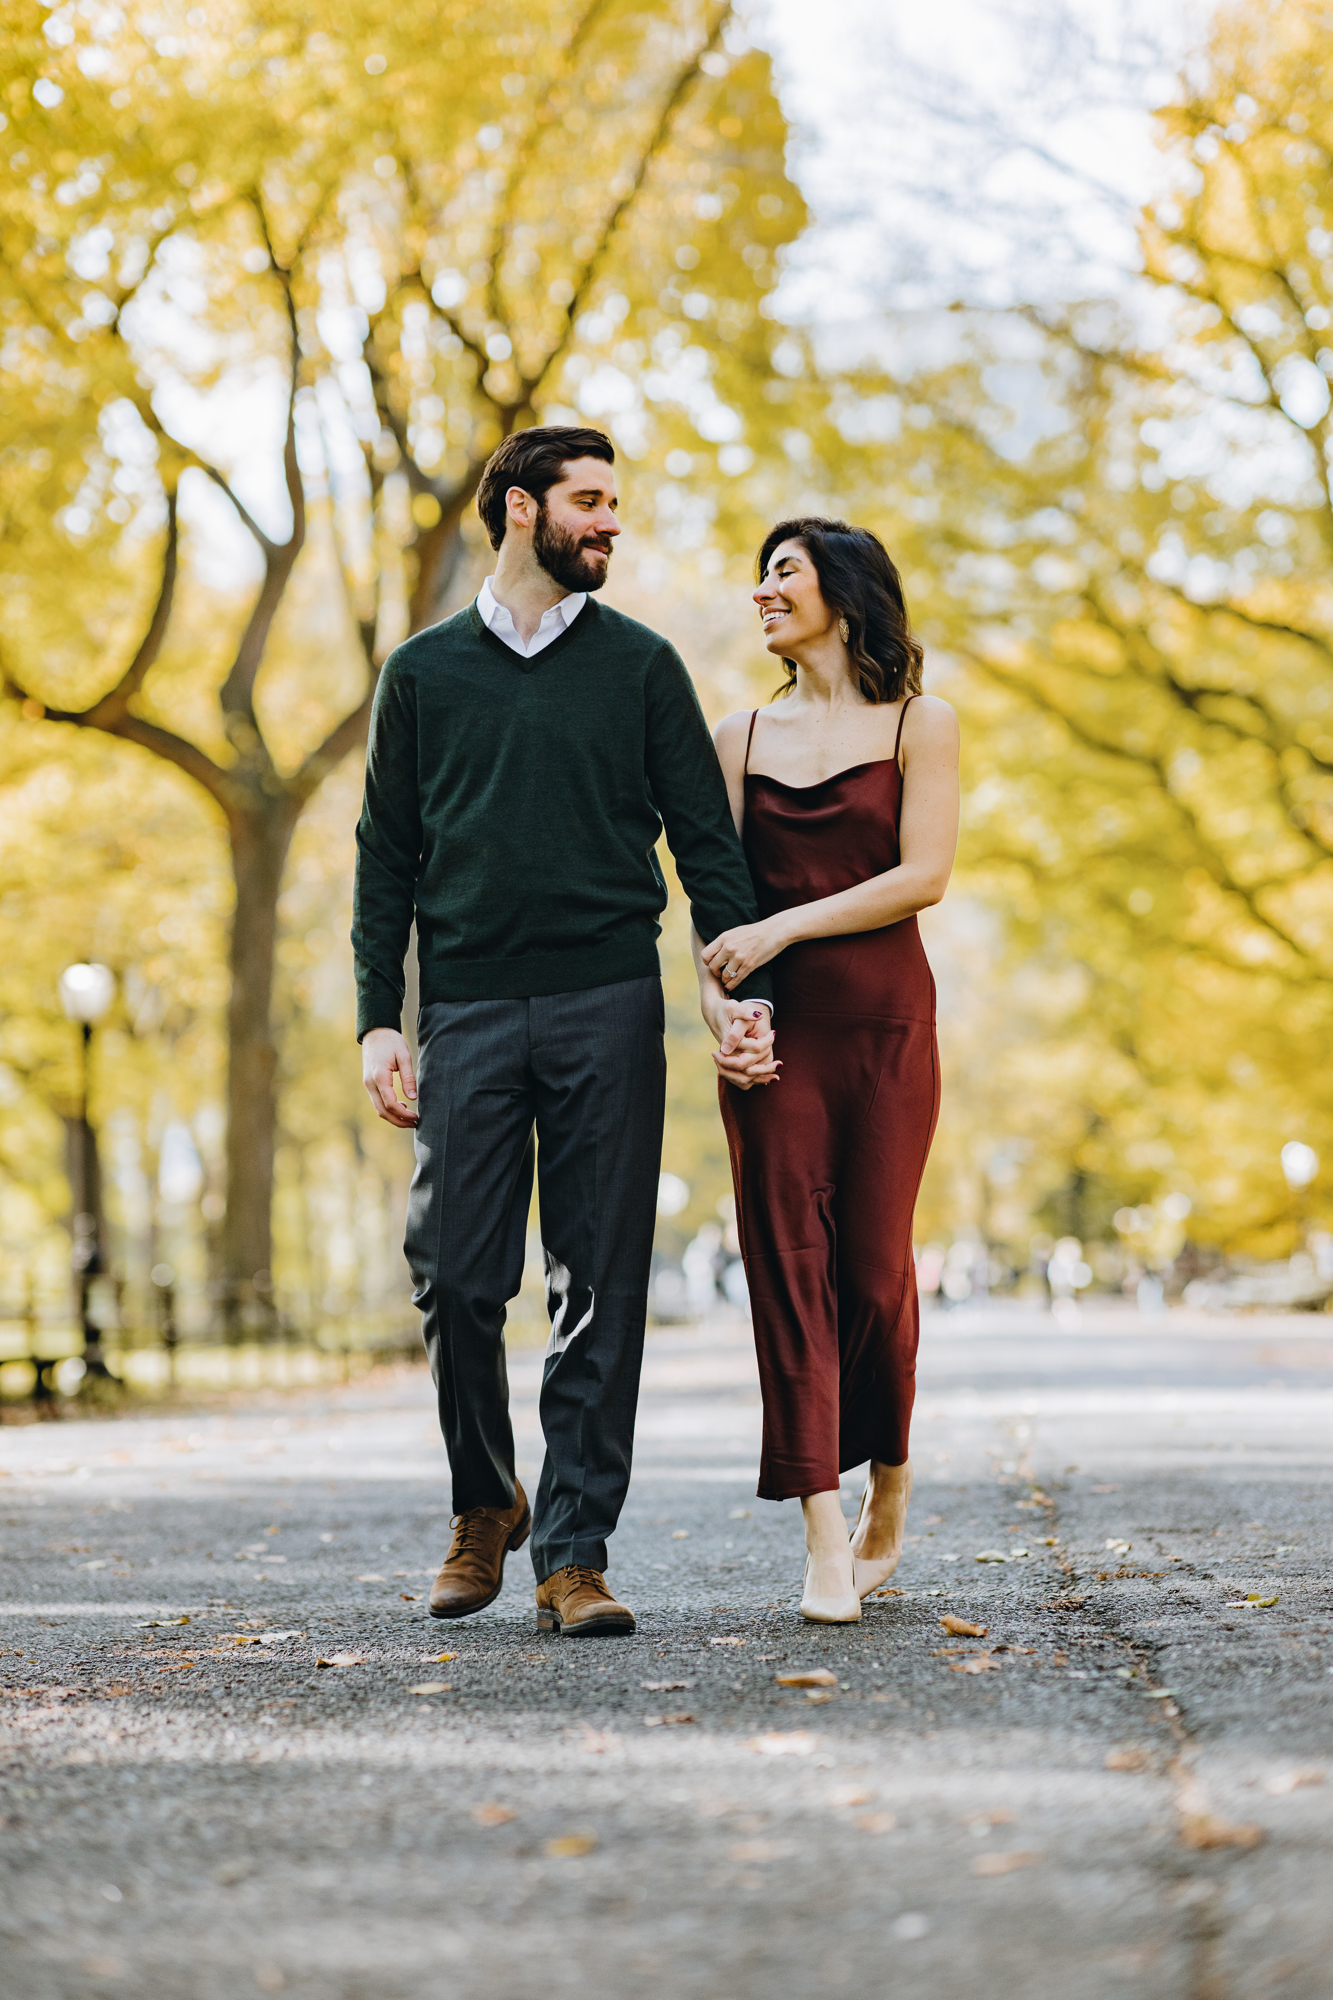 Idyllic Central Park Engagement Photos in Fall